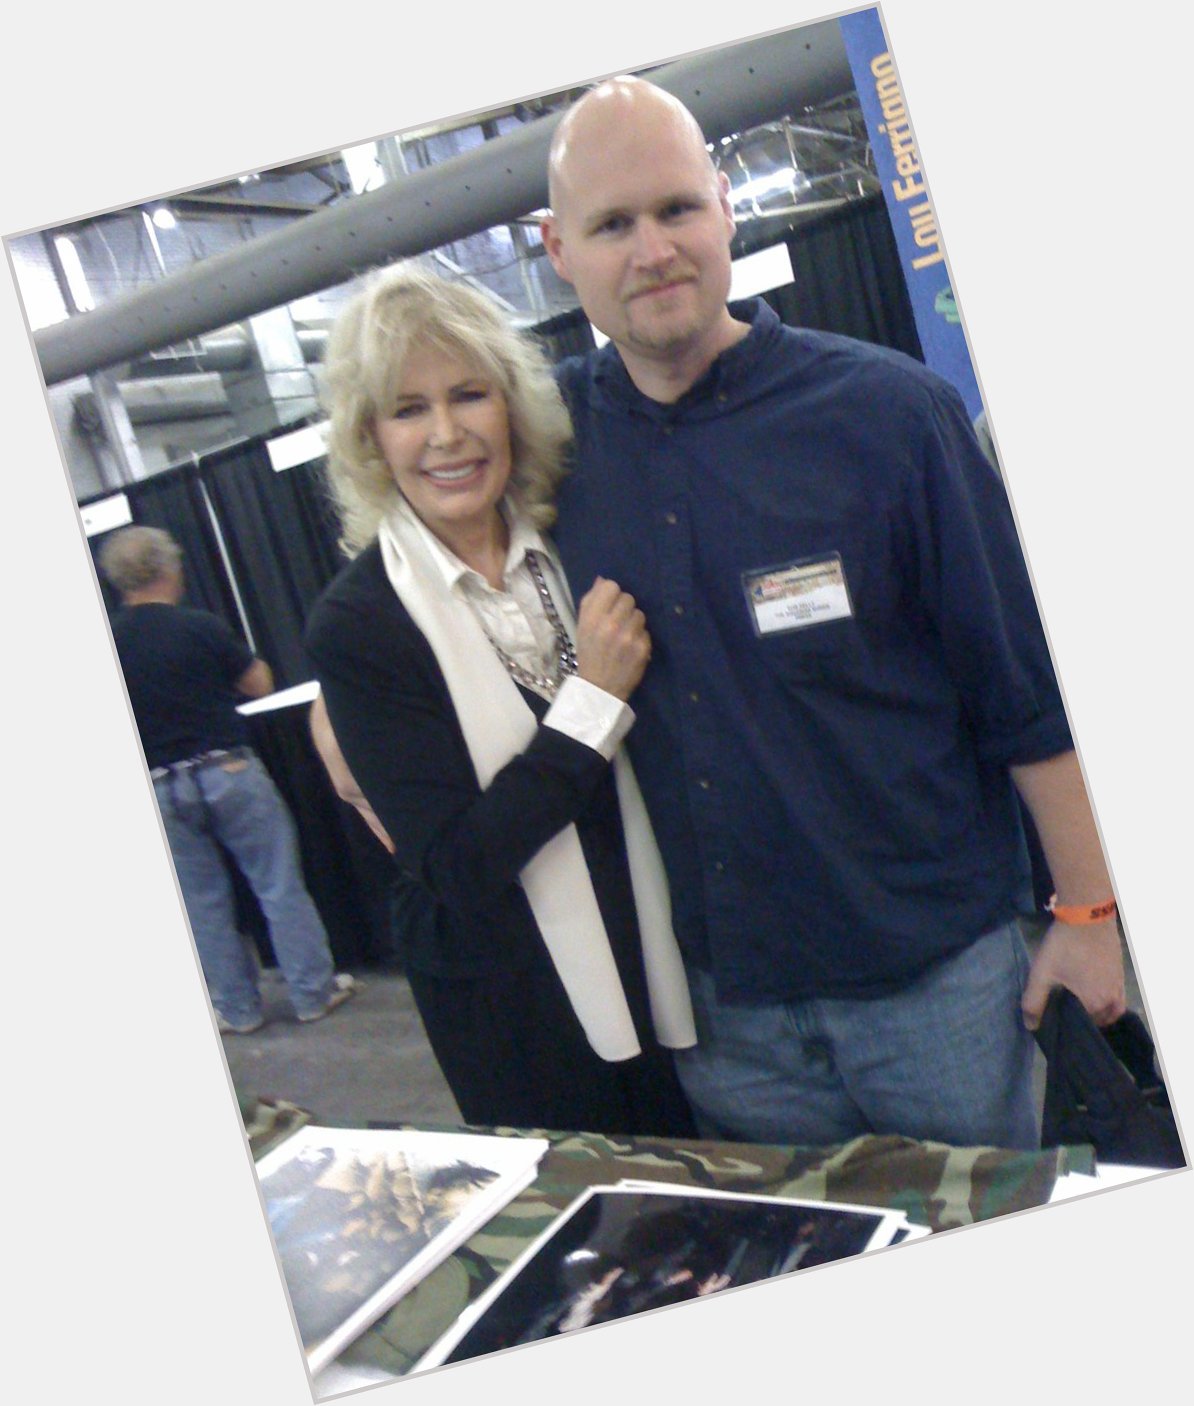 Happy Birthday to Loretta Swit! Meeting her was one of the great moments of my life. 